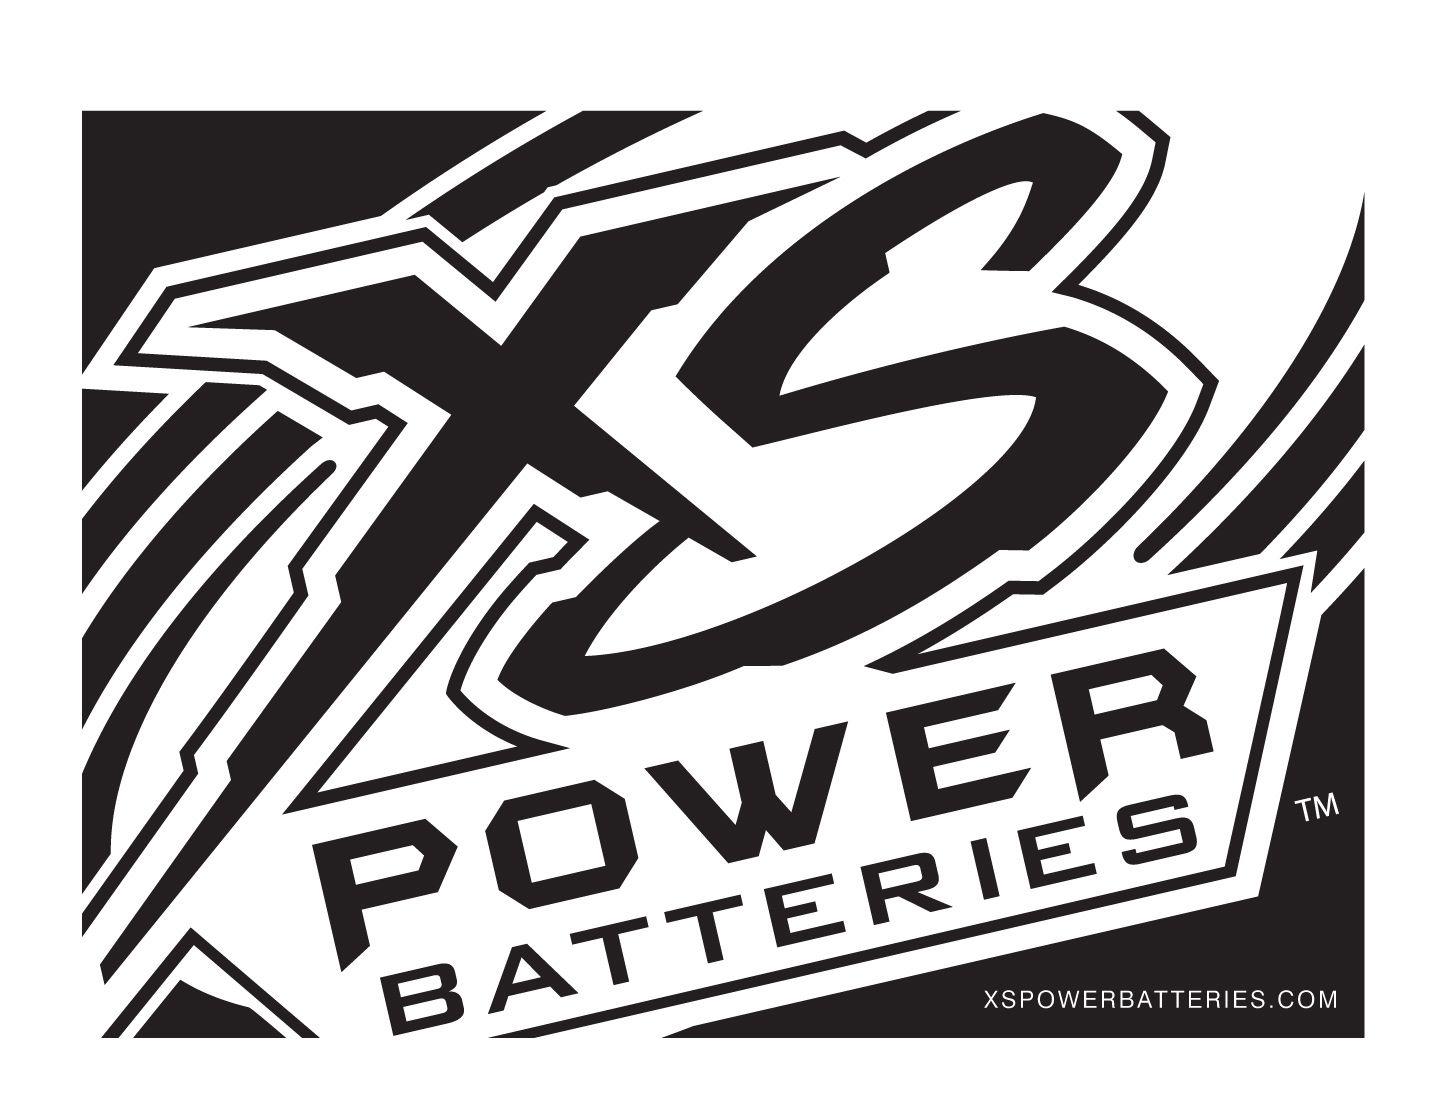 XS Power Logo - Plastic Event Banner-Expanded Logo - XS Power